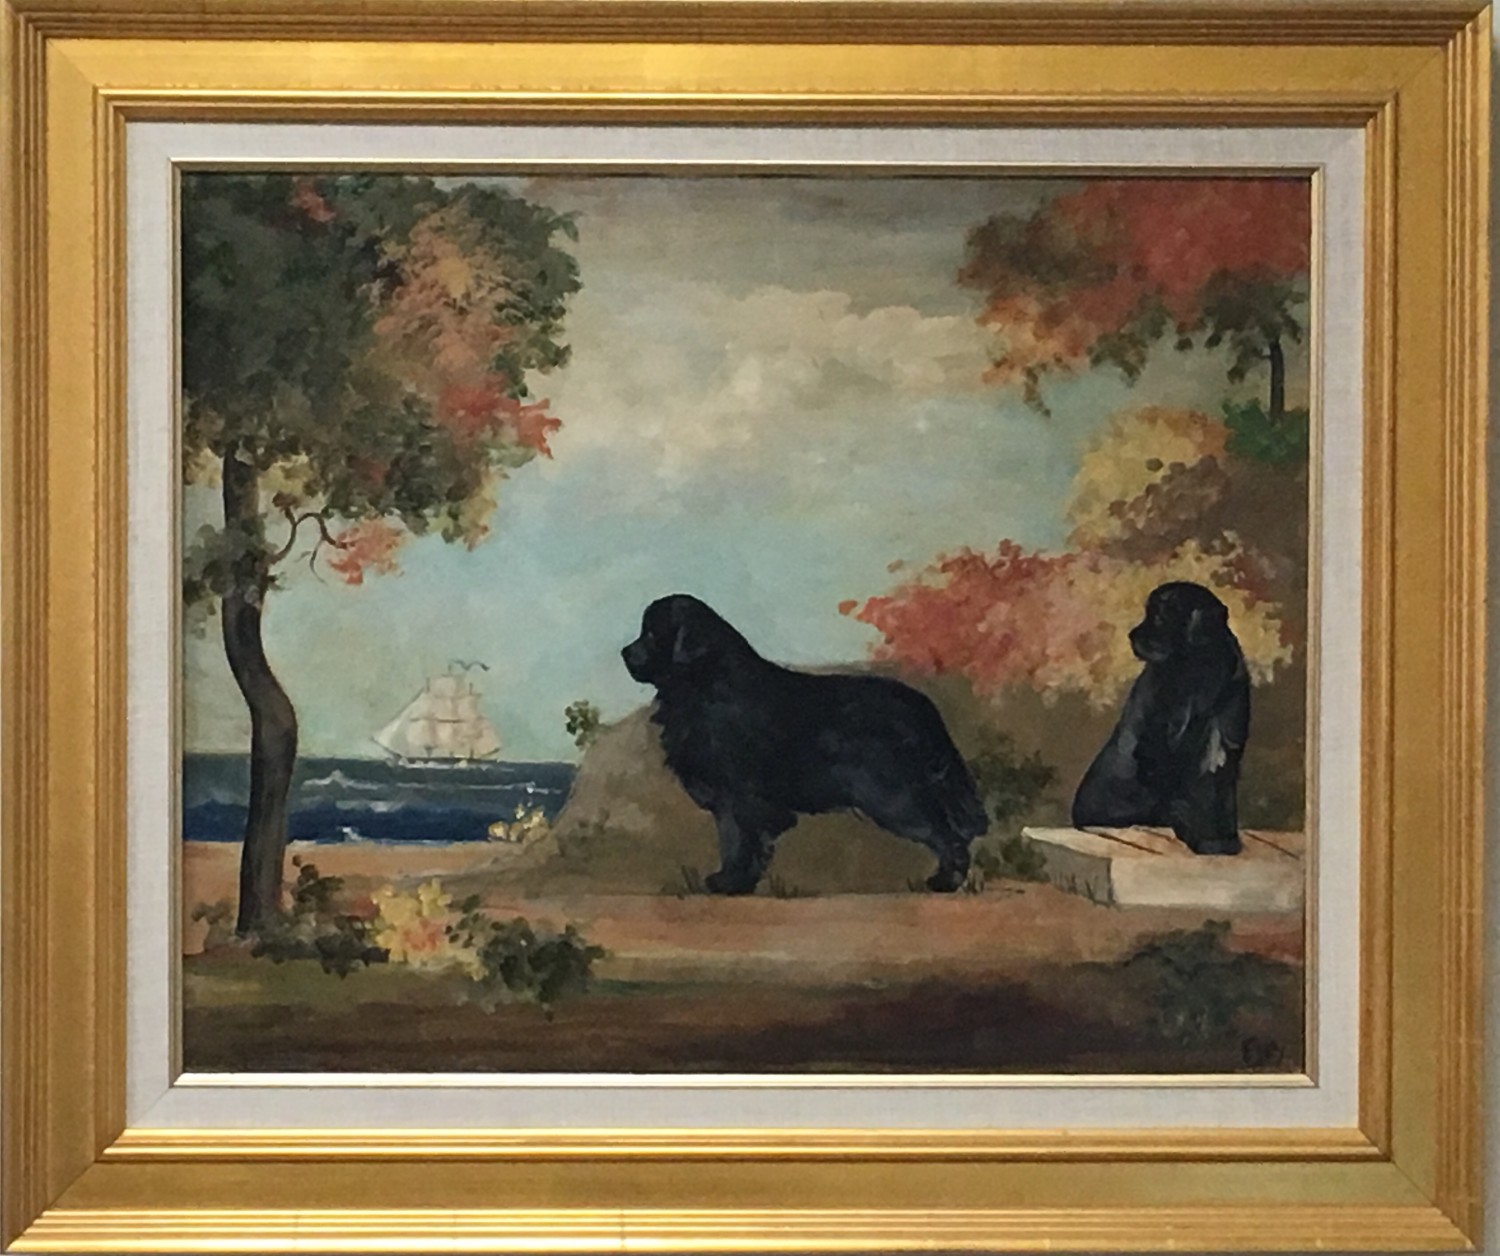 Newbury Animal Hospital - Newbury, MA - This beautiful painting was given to us by a good friend and client, Esty Duff  who will always hold a place of honor in our hearts. 